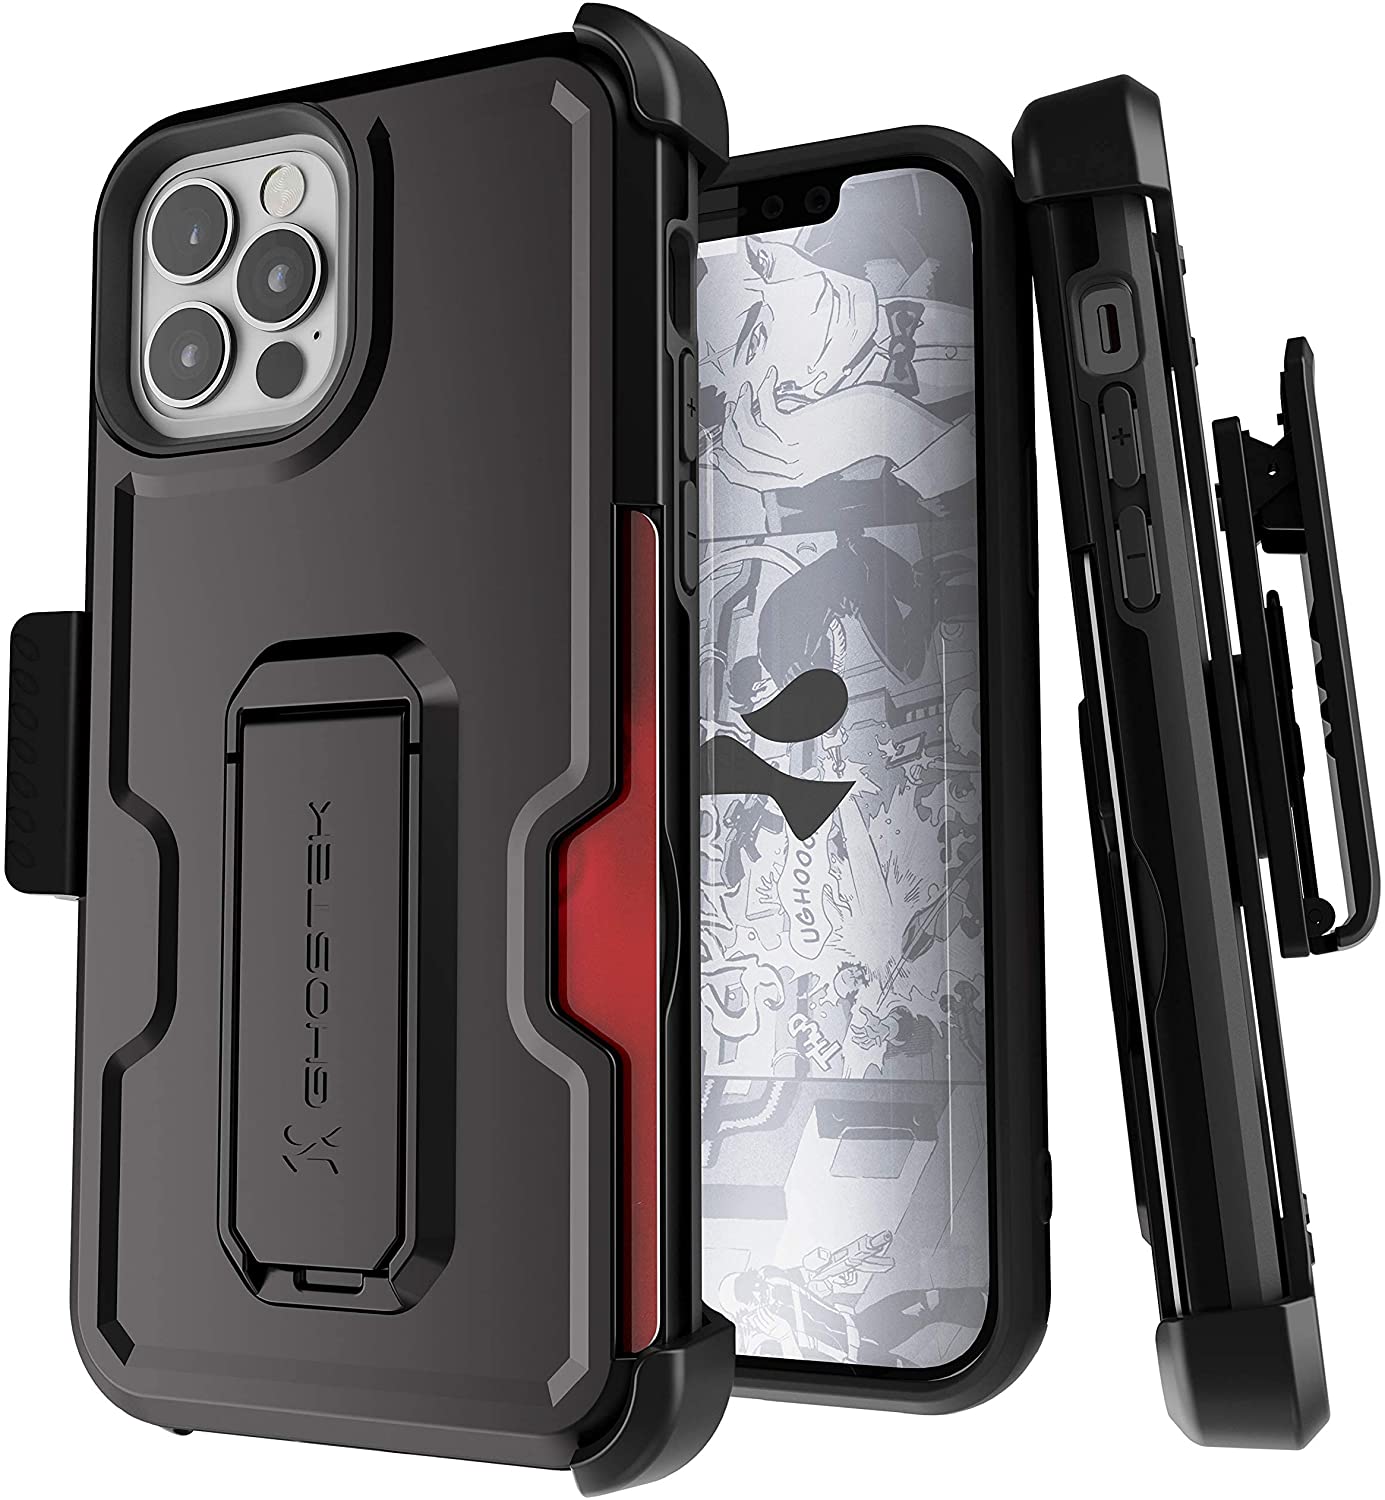 Ghostek Iron Armor 3 Case for iPhone 12 Pro Max (Black)